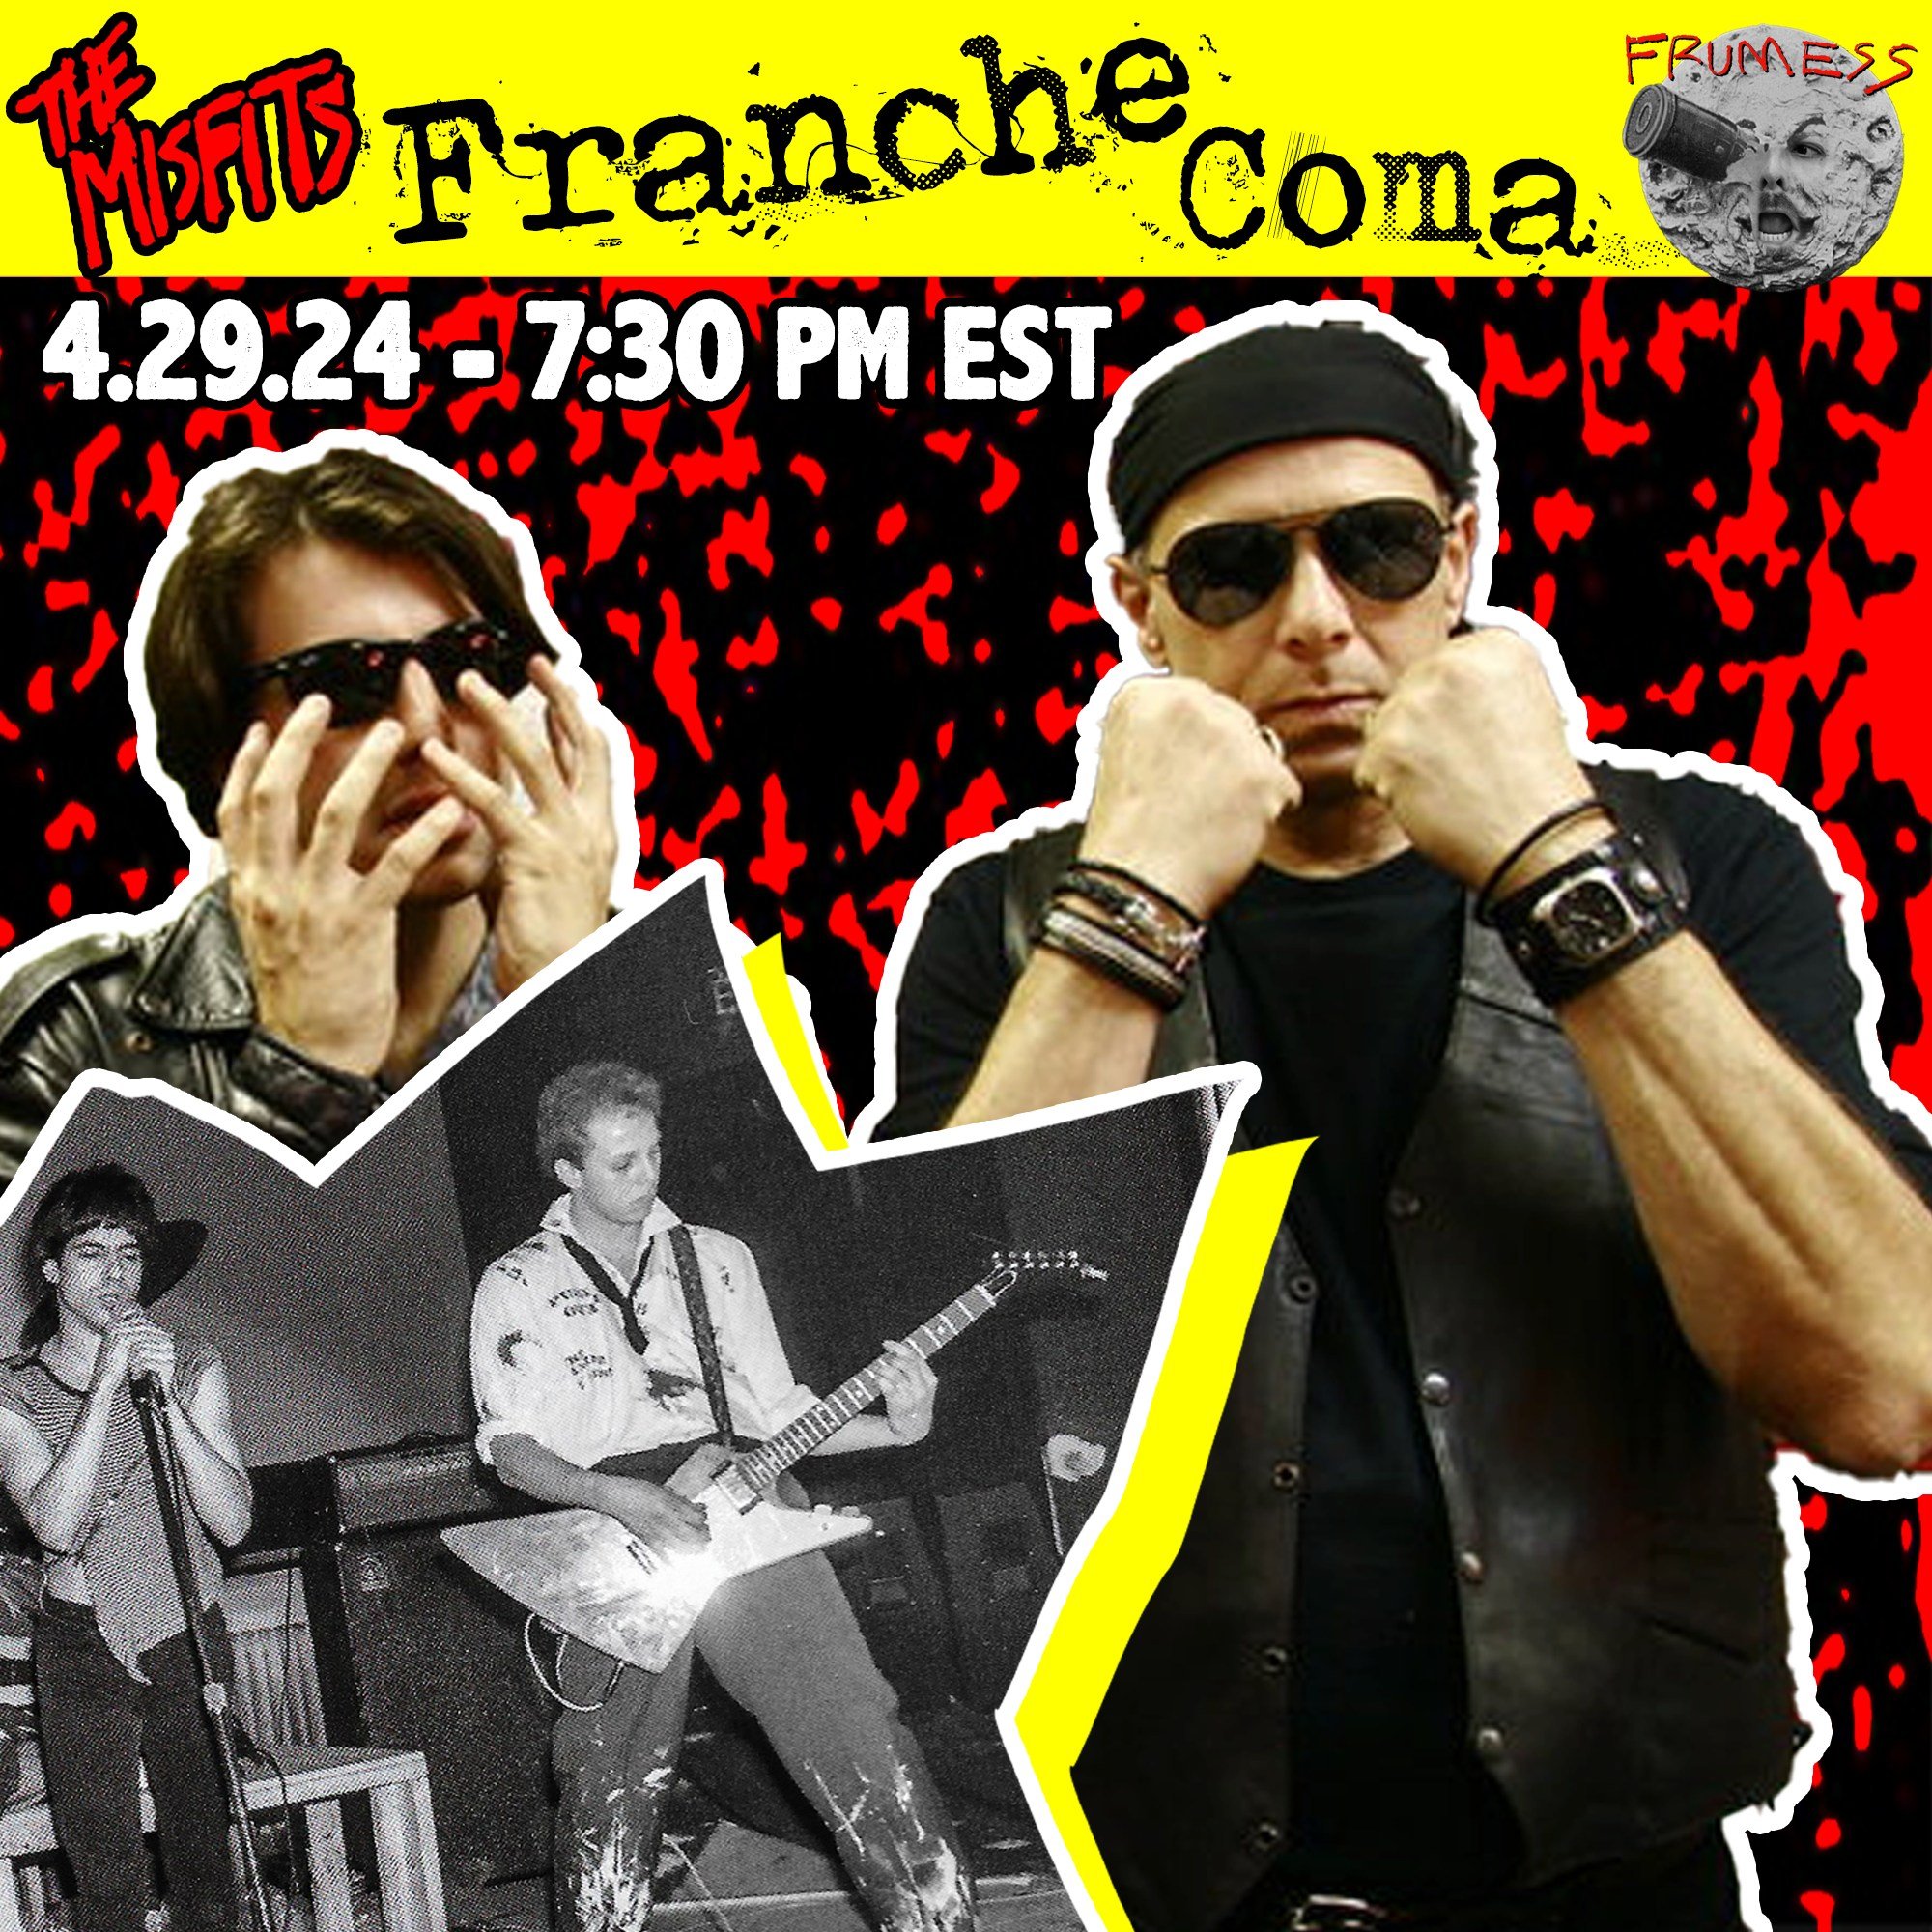 We owe you a show. And a show is coming!
Franche Coma: Monday 4.29.24 @ 7:30 PM EST

#misfits #themisfits #franchecoma #staticage #jerryonly #jimcatania #mrjim #glenndanzig #danzig #plan9 #punk #music #rock #frumess #weare138 #crimsonghost #mannymart